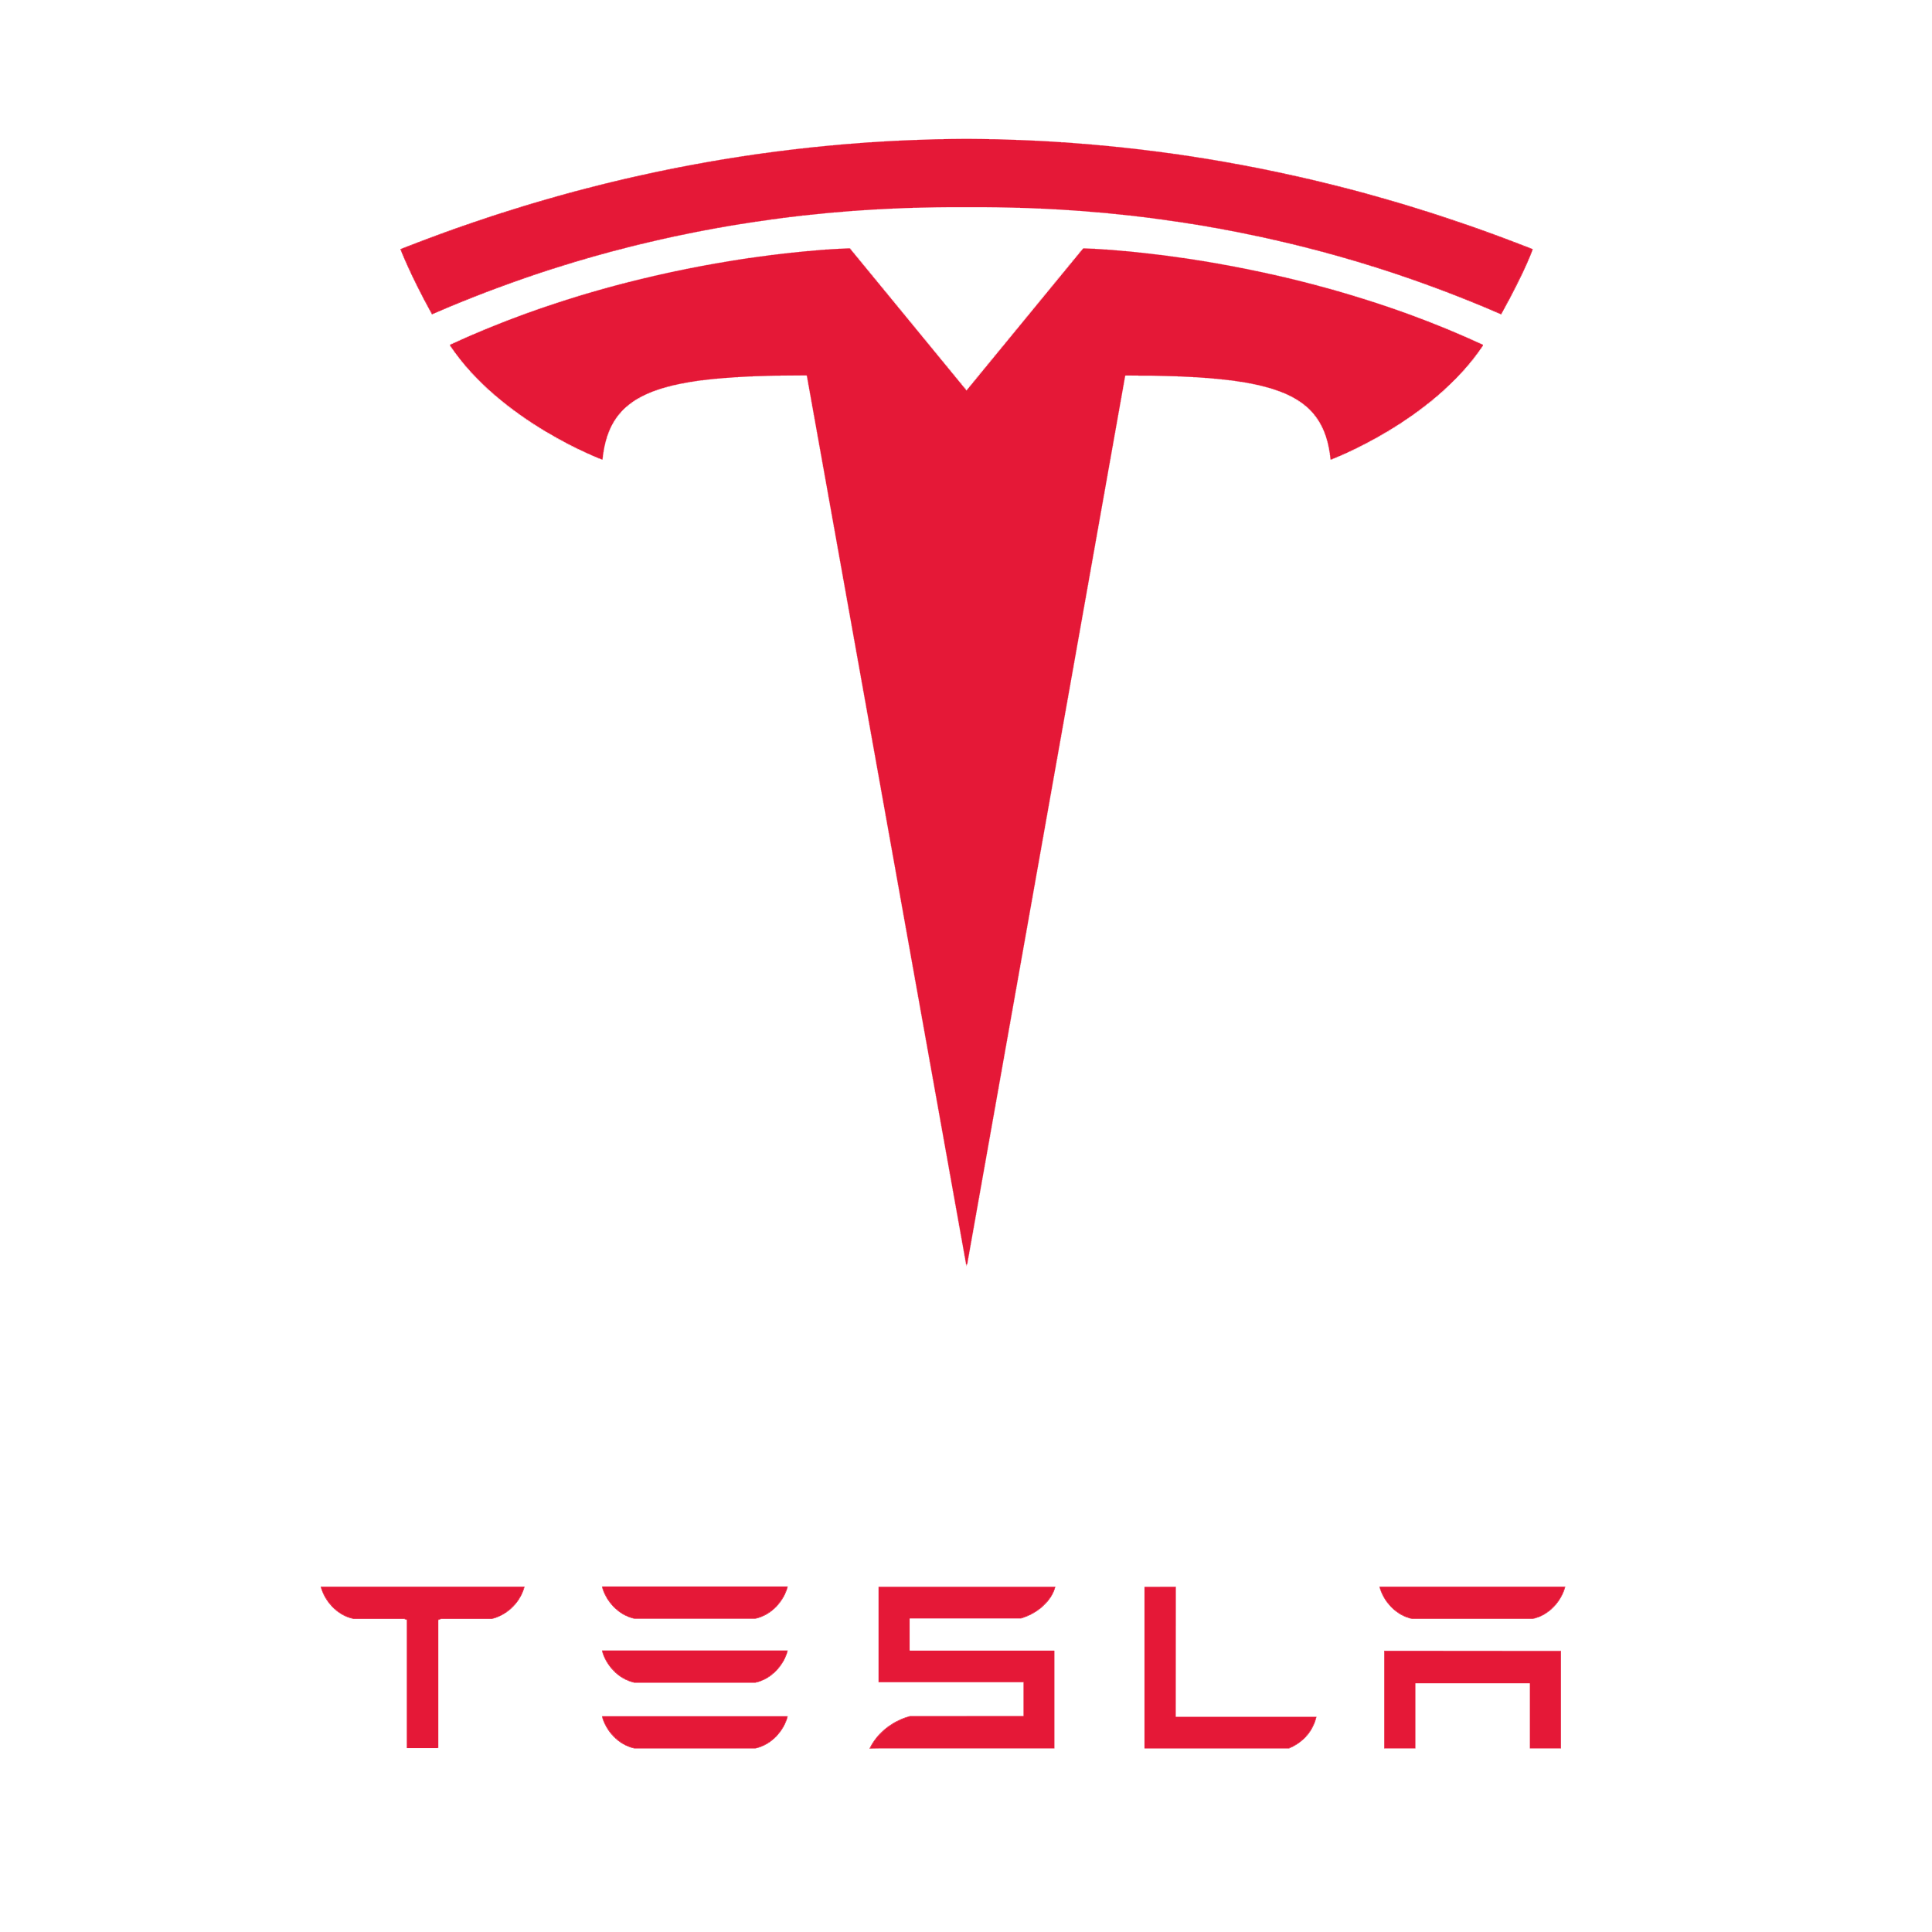 Find out more about Tesla